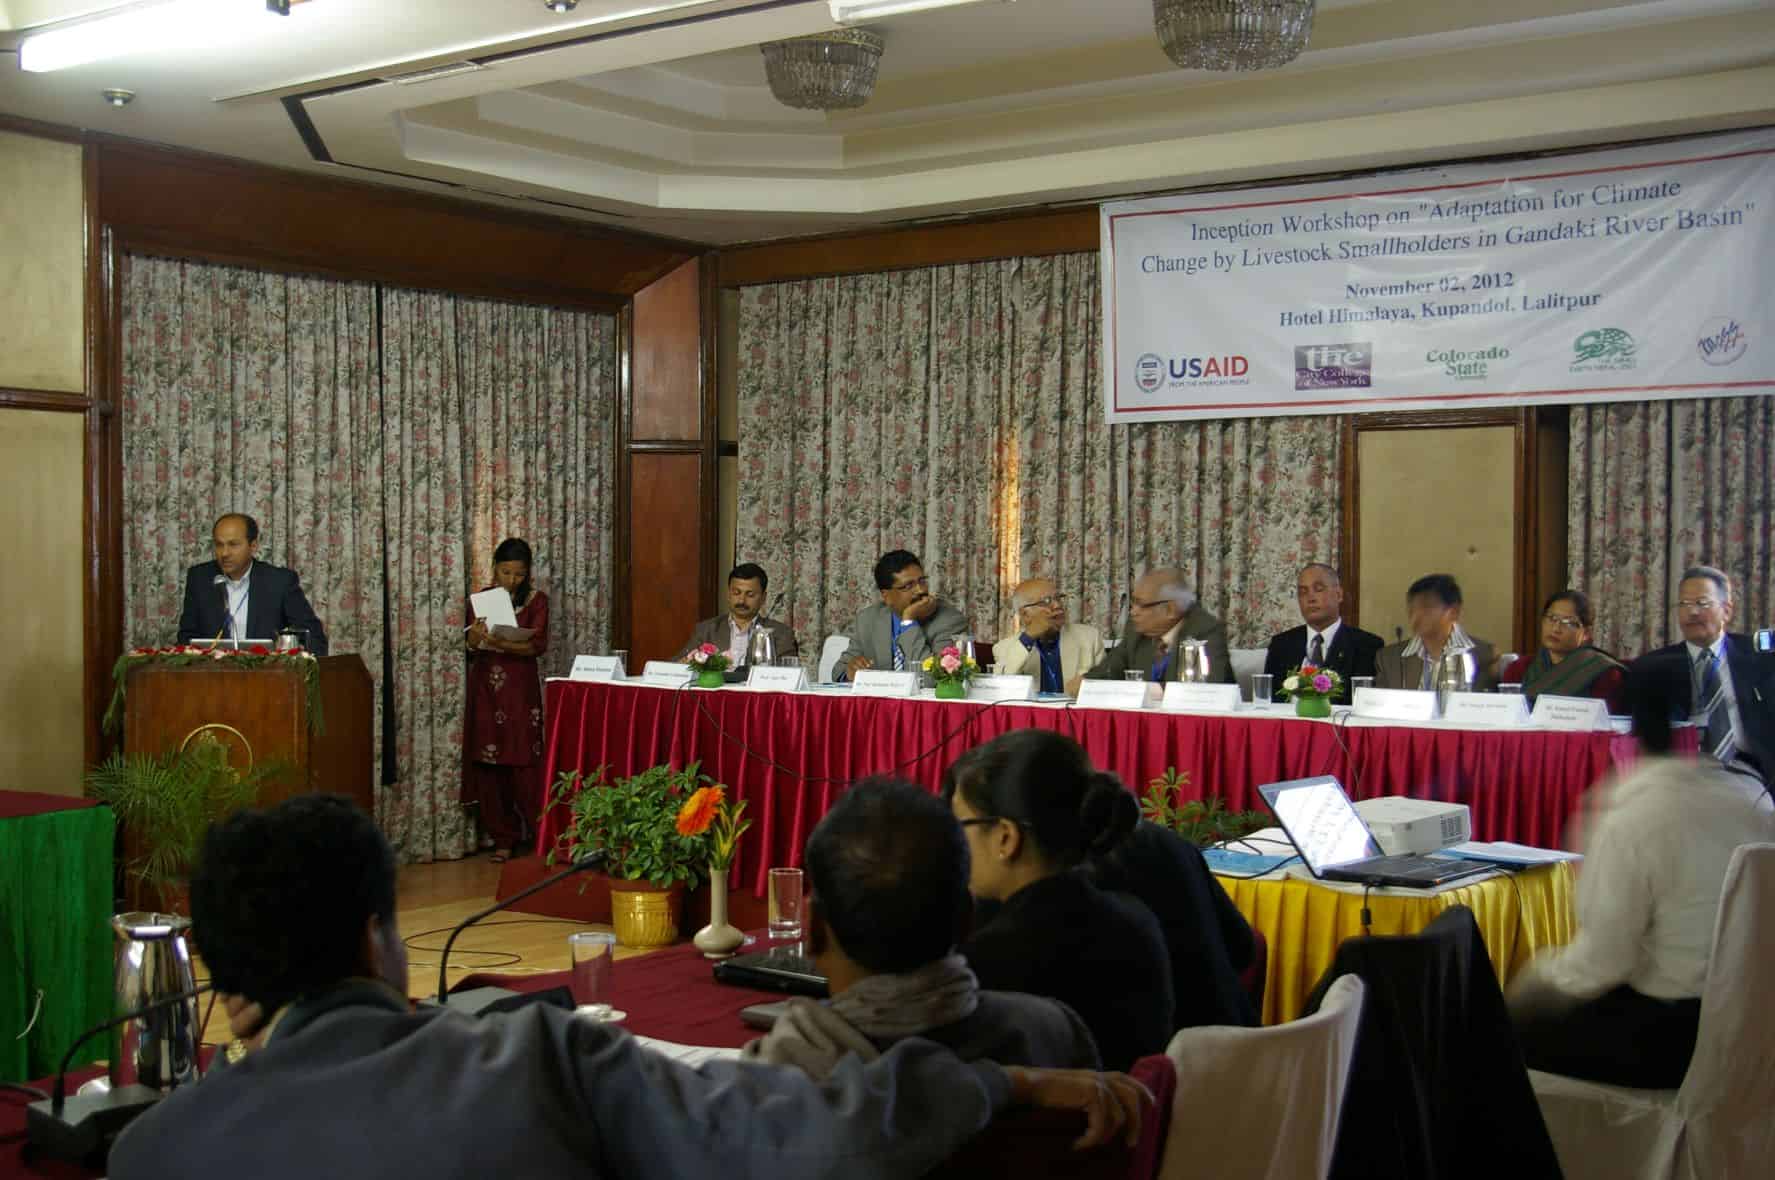 Feed the Future Project on Biodiversity and Climate Change Assessment in Nepal